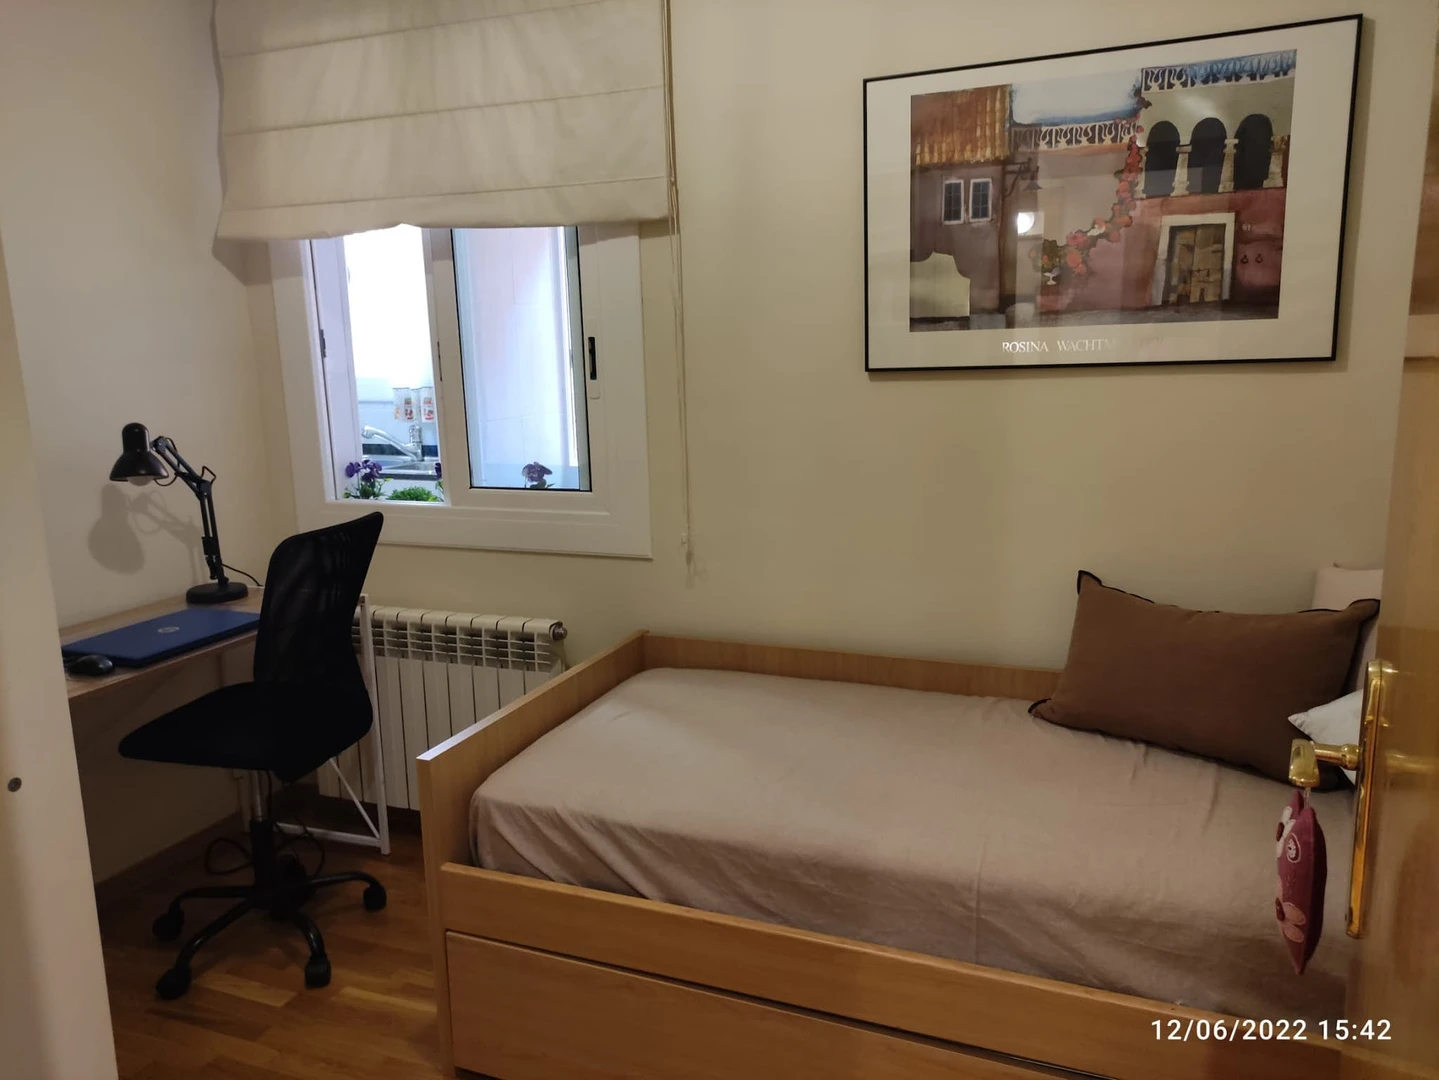 Room for rent in a shared flat in sant-cugat-del-valles